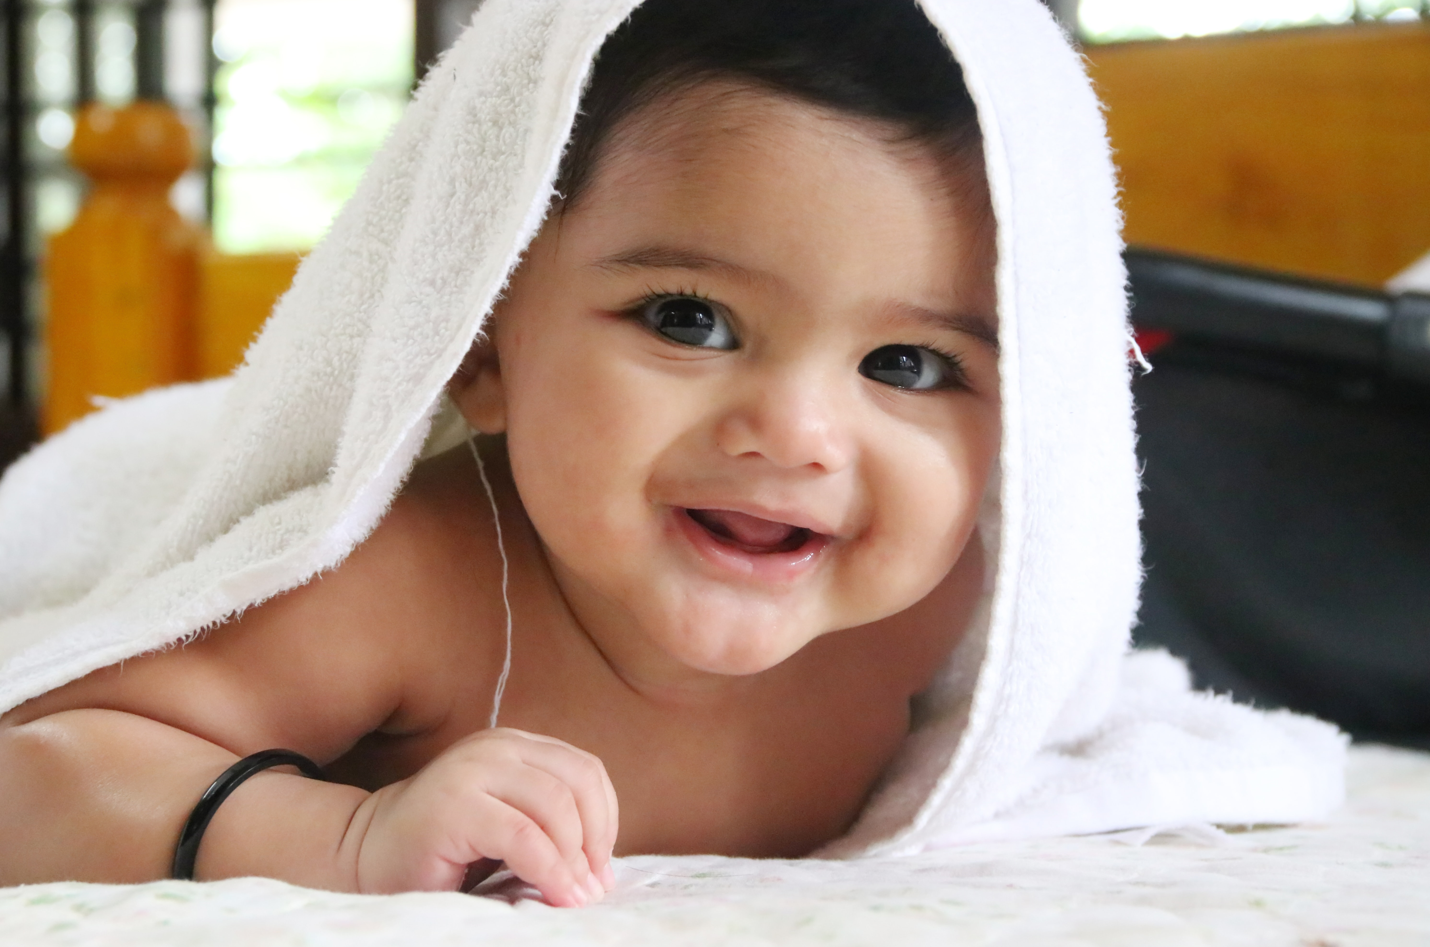 A smiling baby wearing a soft baby towel. Baby towels can be used by adults as well